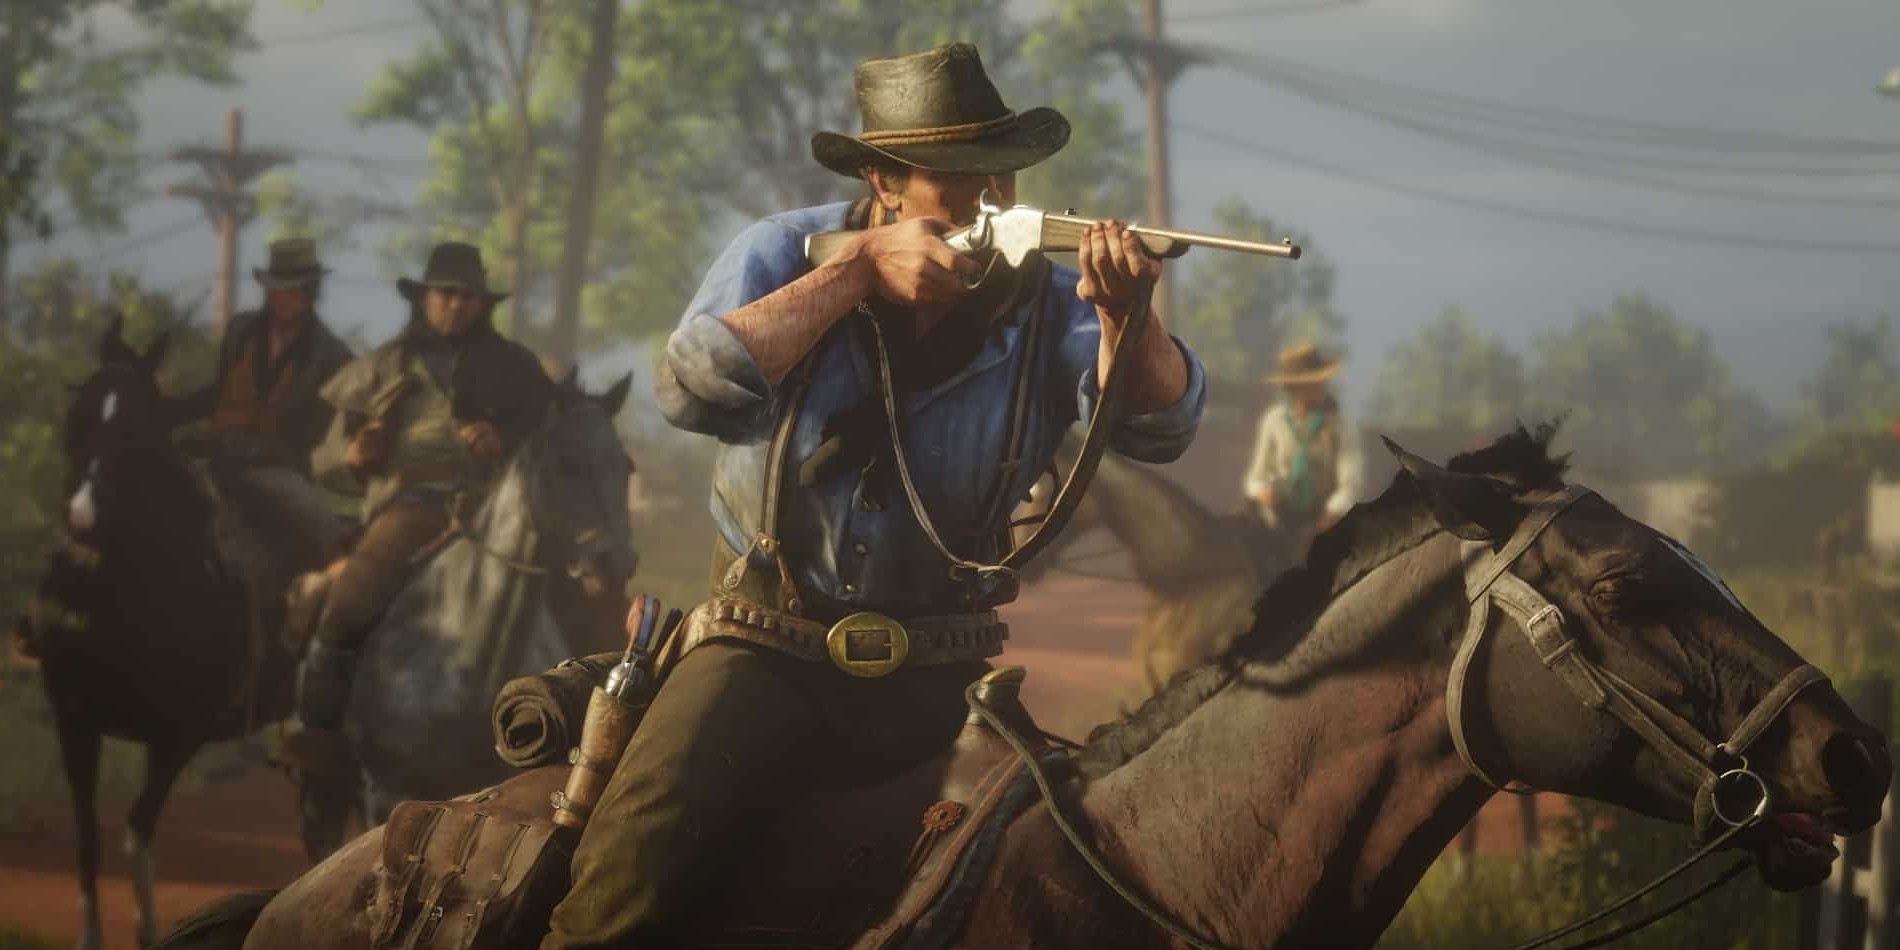 GTA 6's protagonist should keep weapons in their car like Arthur on his horse.